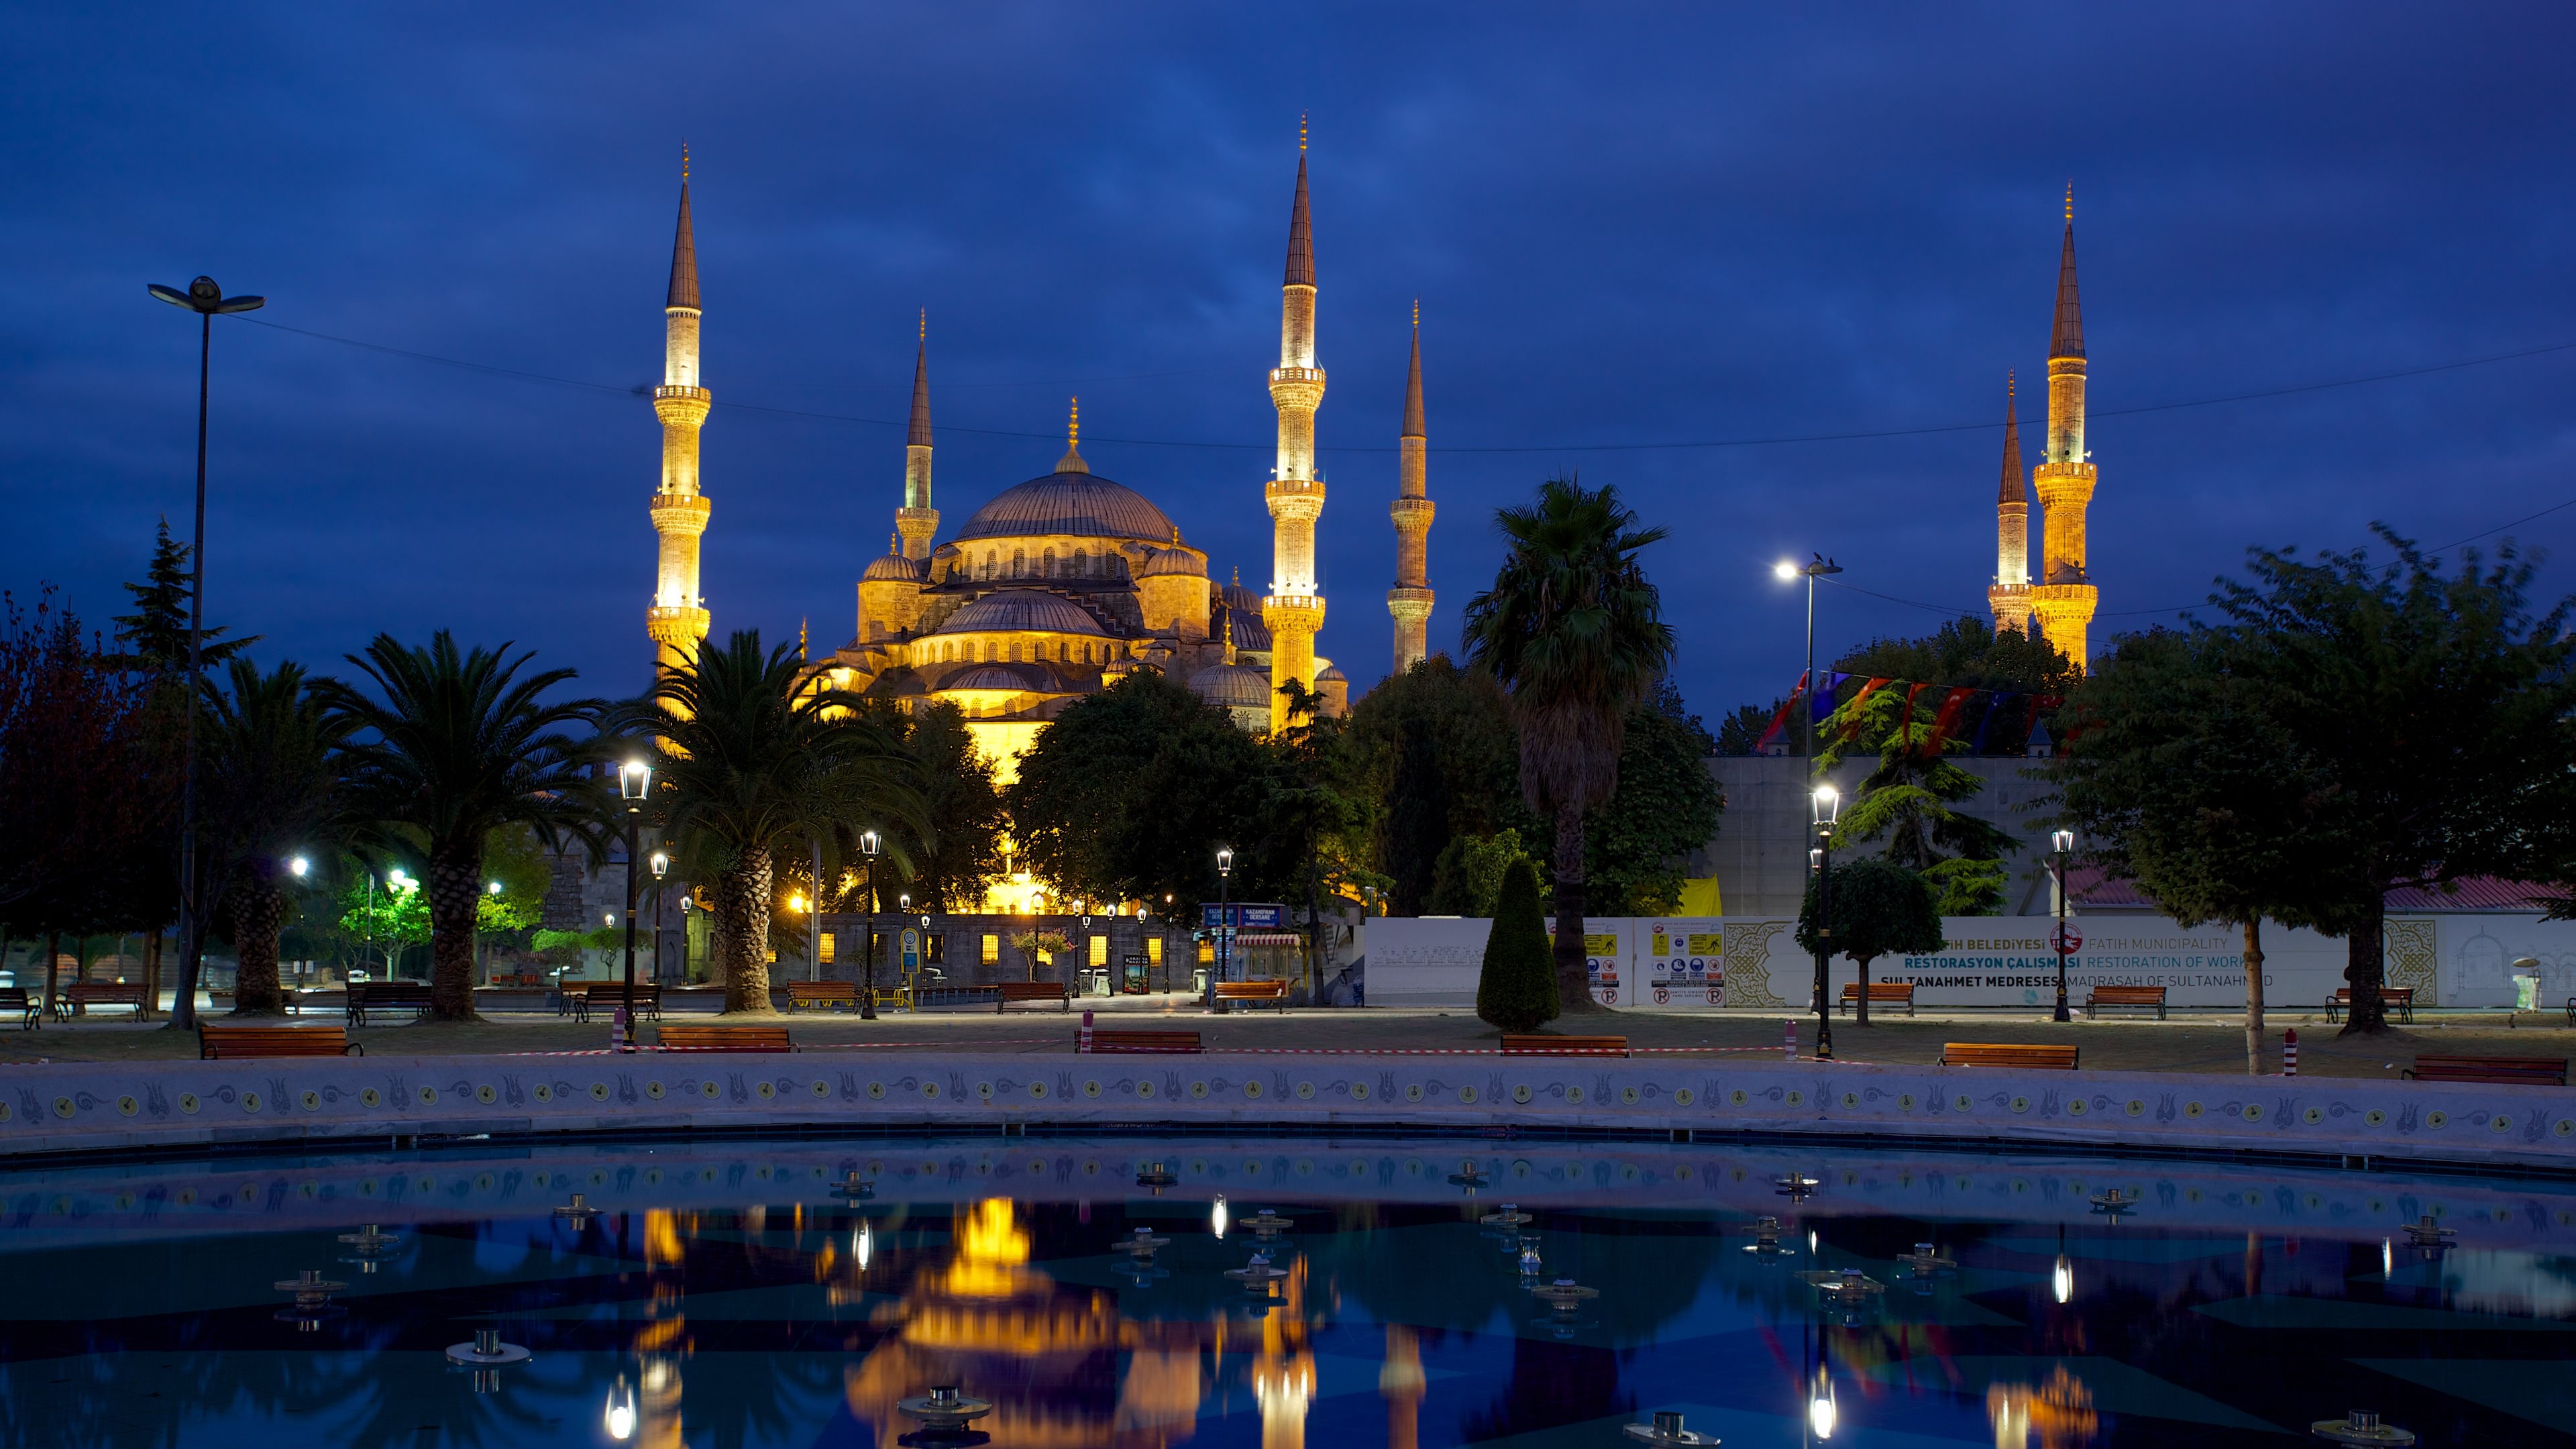 islam, mosques, religious, sultan ahmed mosque, mosque, night